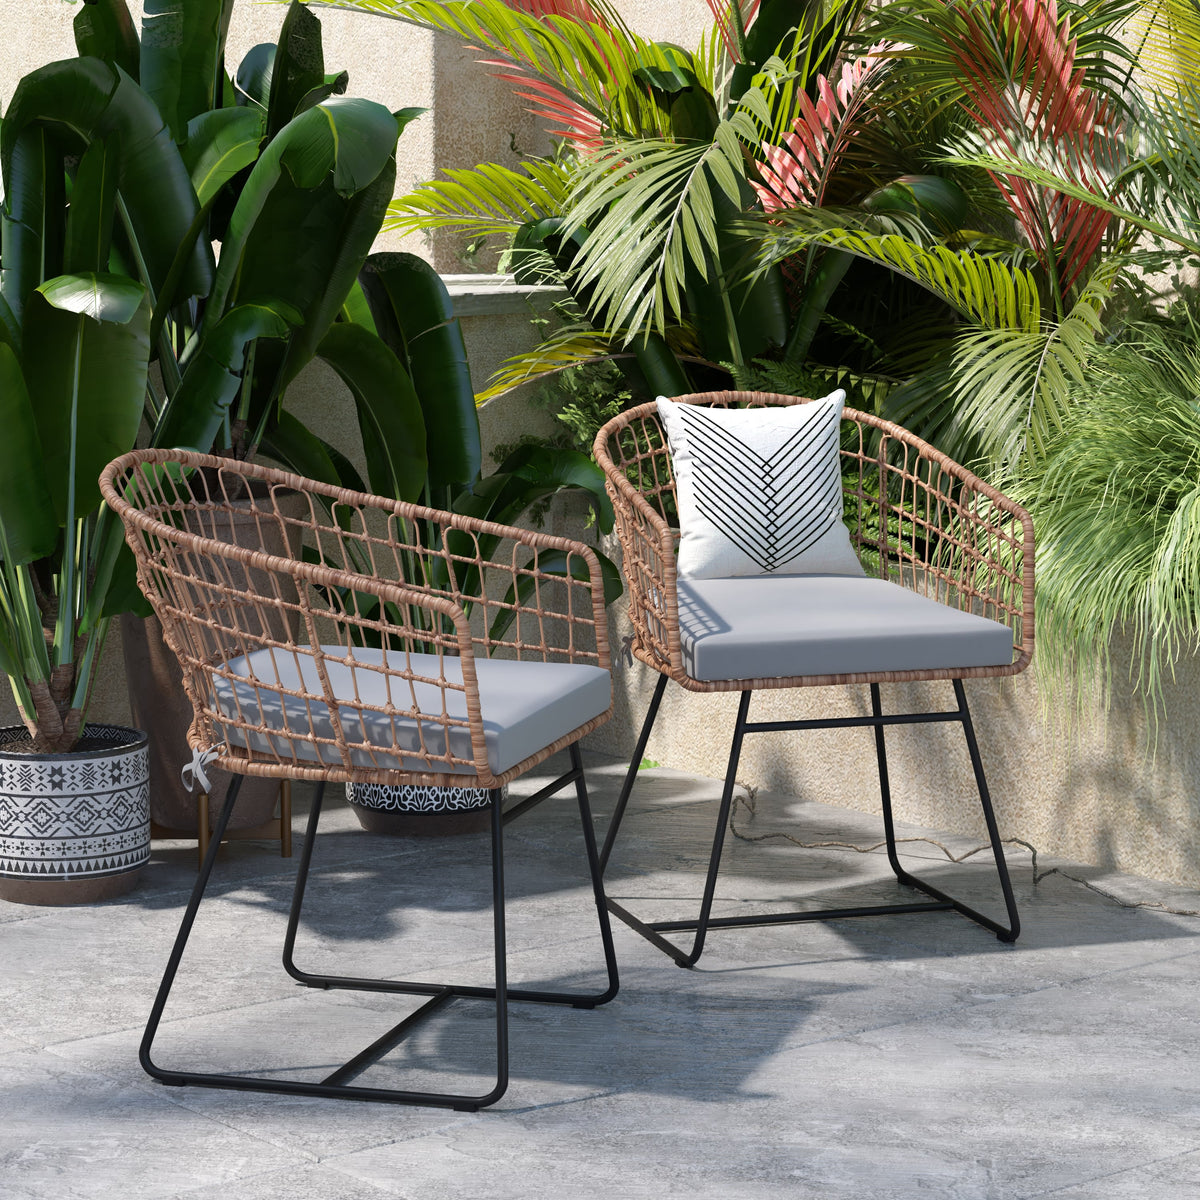 Light Gray Cushion/Natural Frame |#| 2PK Indoor/Outdoor Natural Boho Rattan Rope Club Chairs-Light Gray Seat Cushions